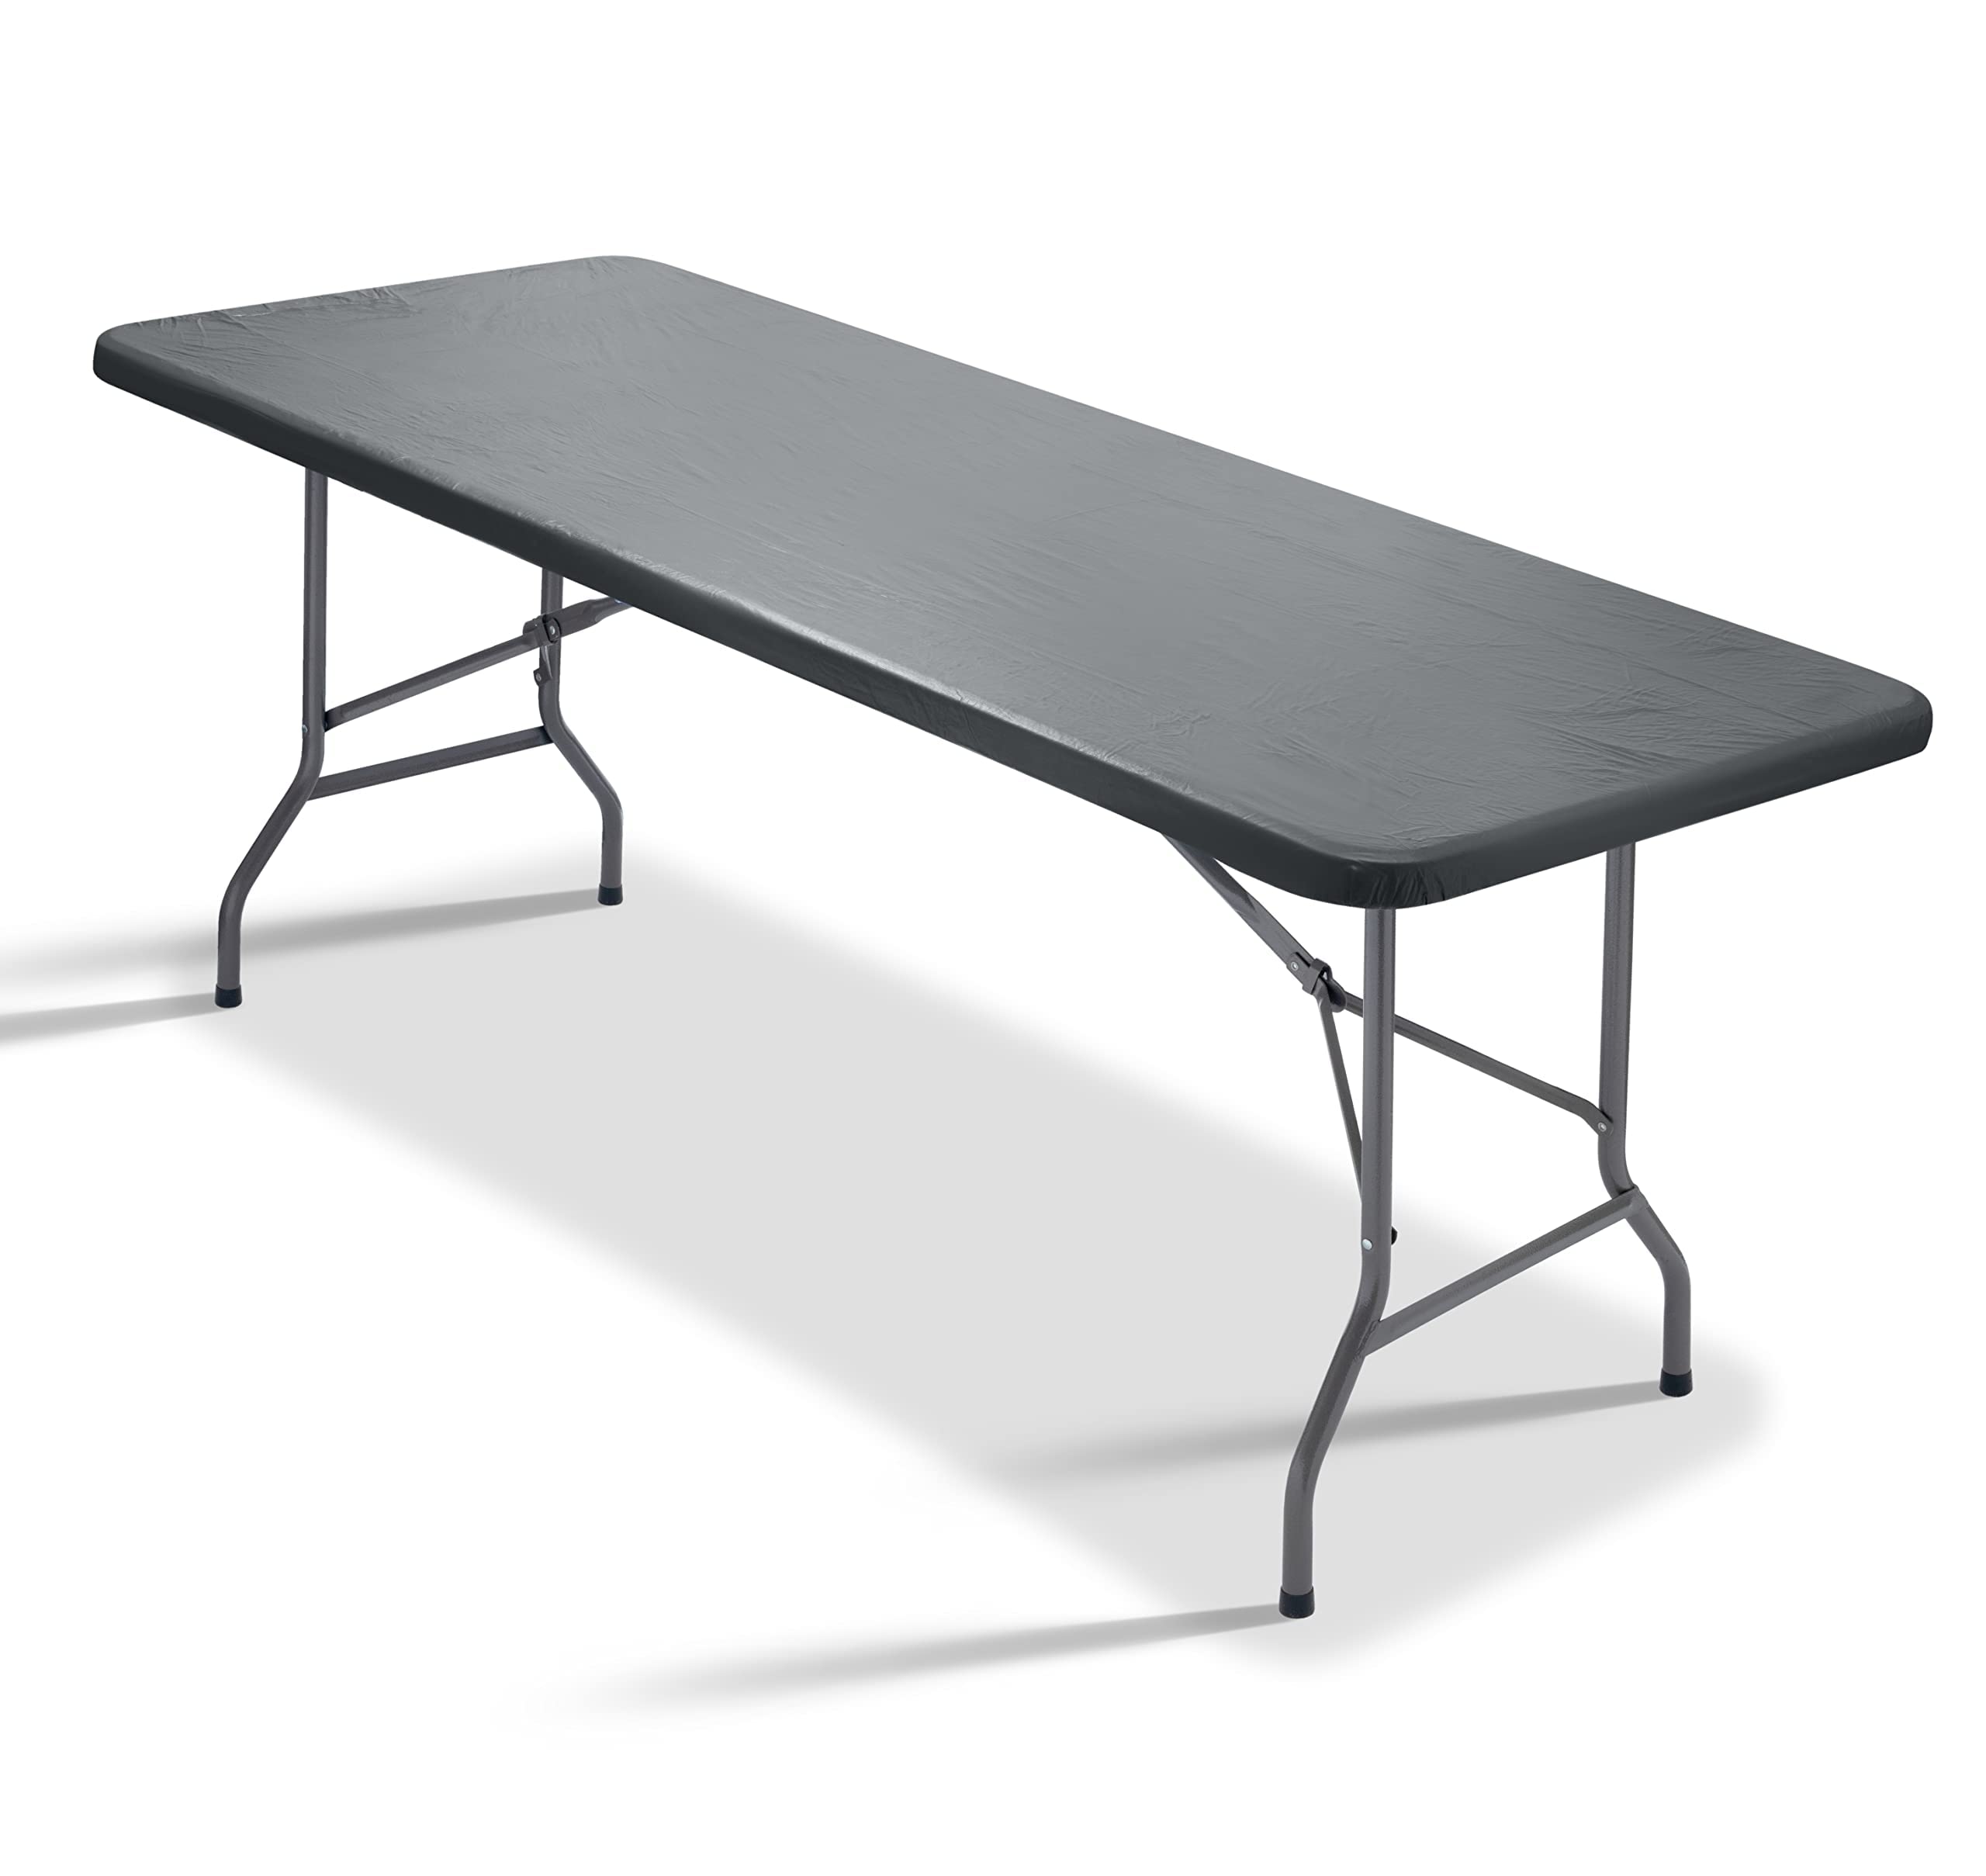 Sorfey Tablecover -Fitted with Elastic, Vinyl with Flannel Back, Fits for Table 30" to 36" W x 96" L Rectangle Stretchable Conveniently,Water Proof, Easy to Clean, Checked Red Design  - Good